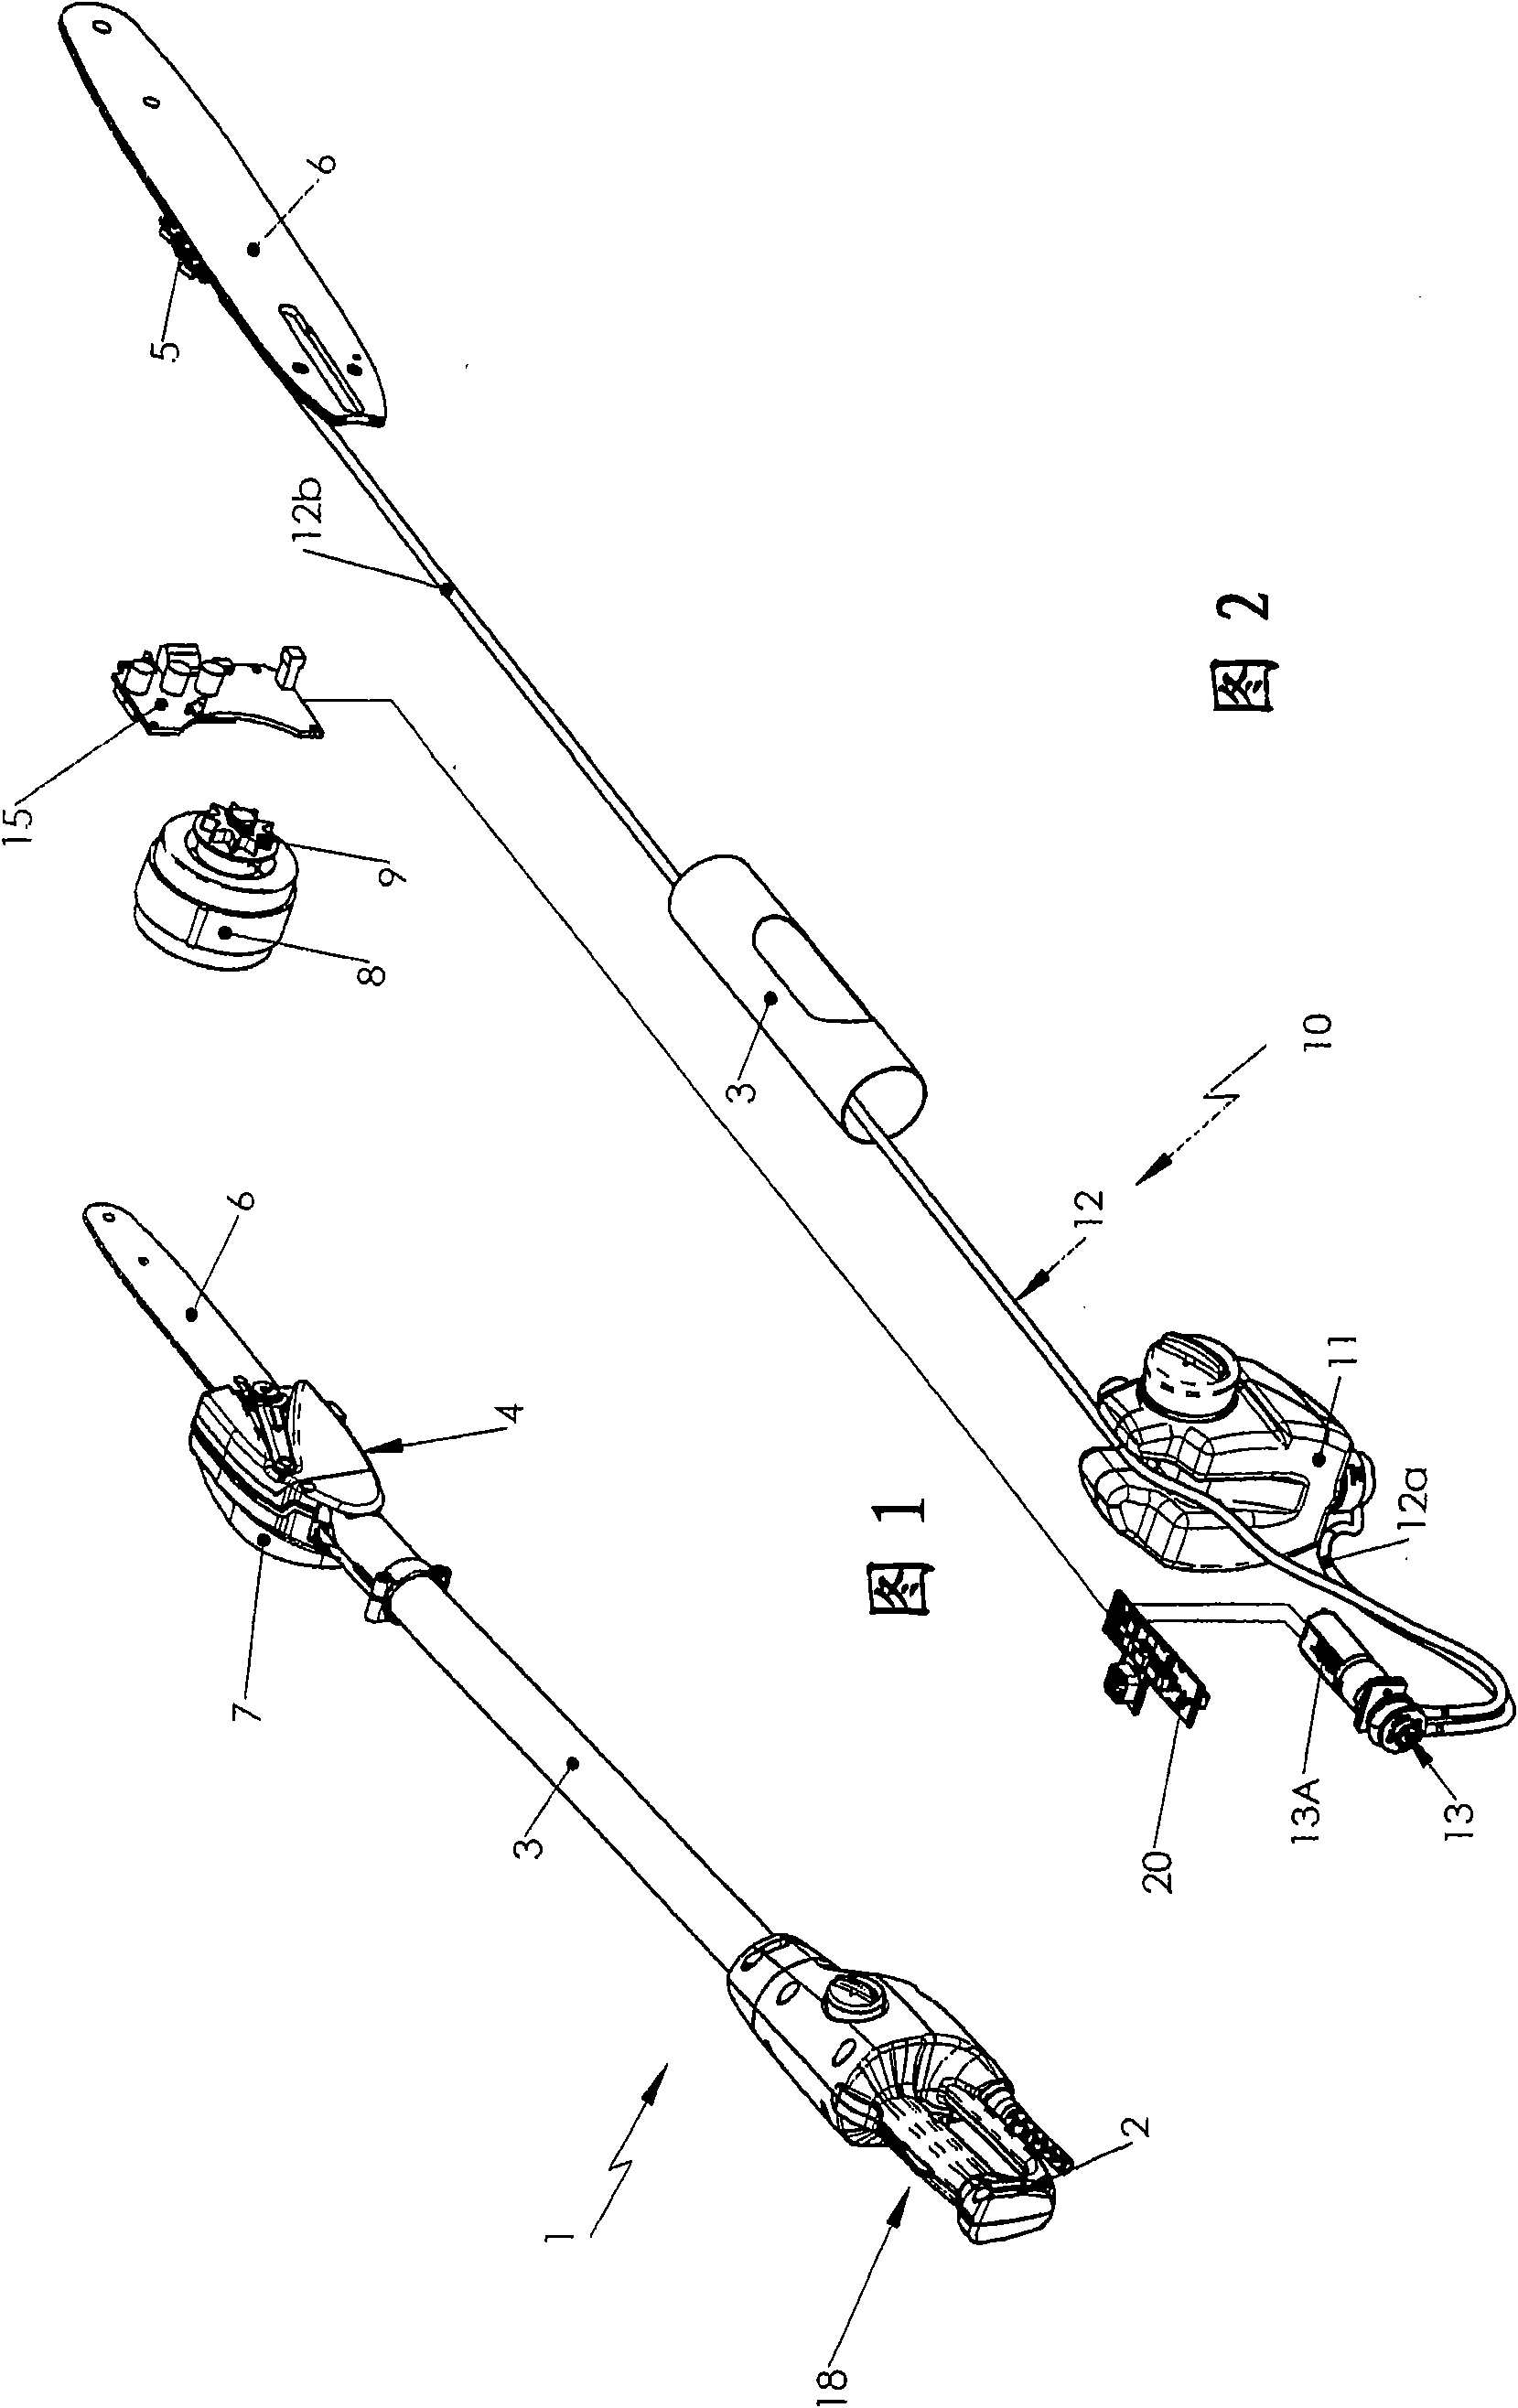 Chain saw provided with a lubrication device and method implemented for performing said lubrication